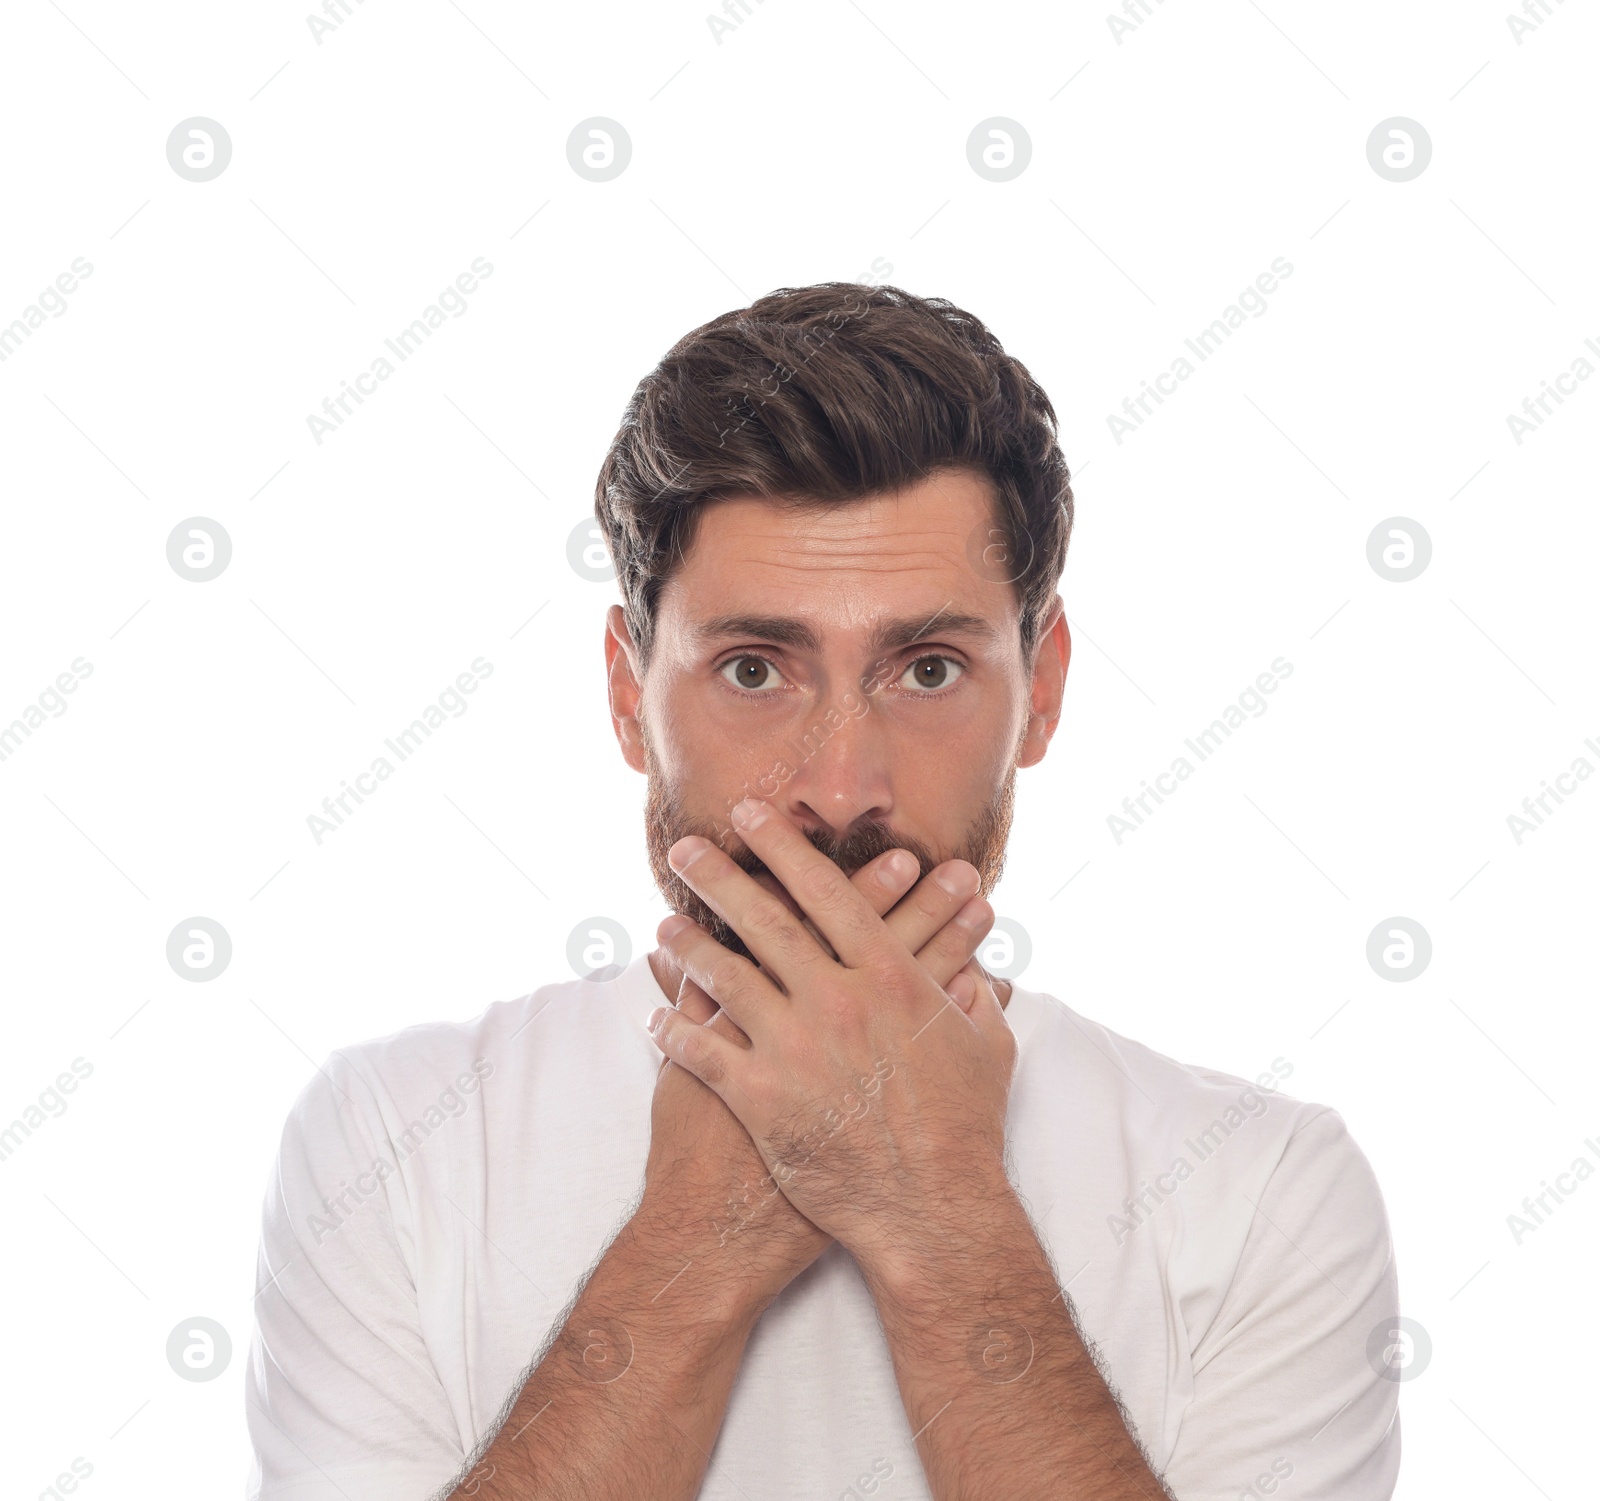 Photo of Embarrassed man covering face with hands on white background